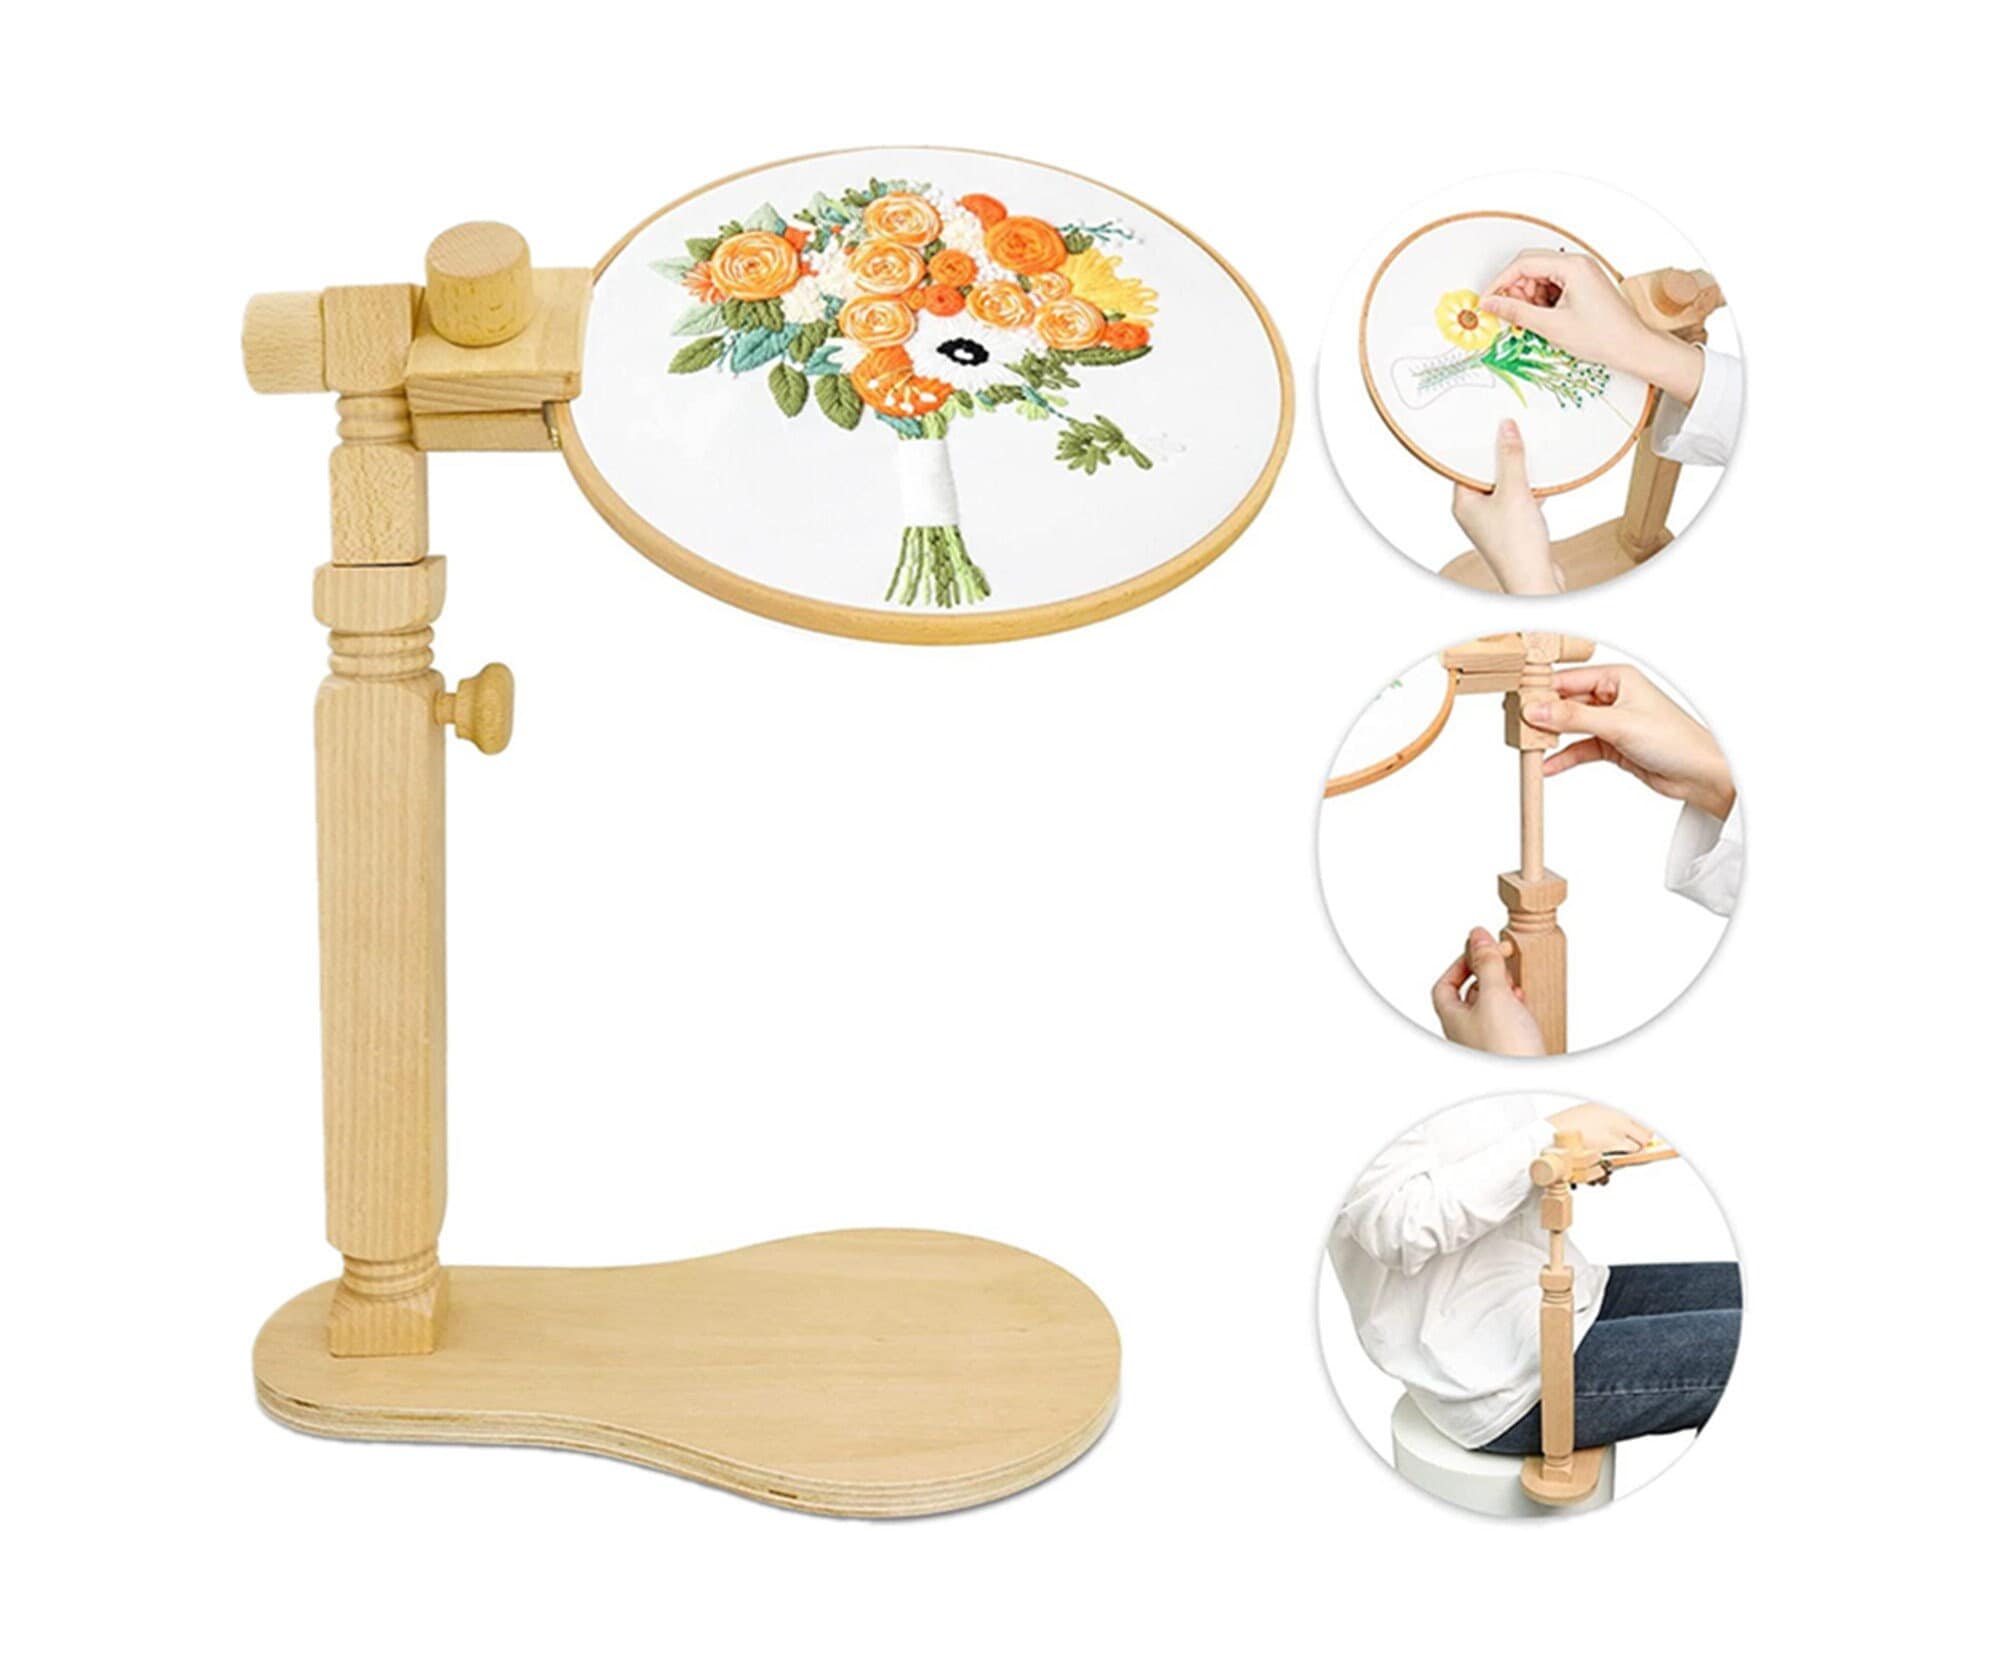 Adjustable Rotated Embroidery Hoop Stand, Cross Stitch Stand Lap